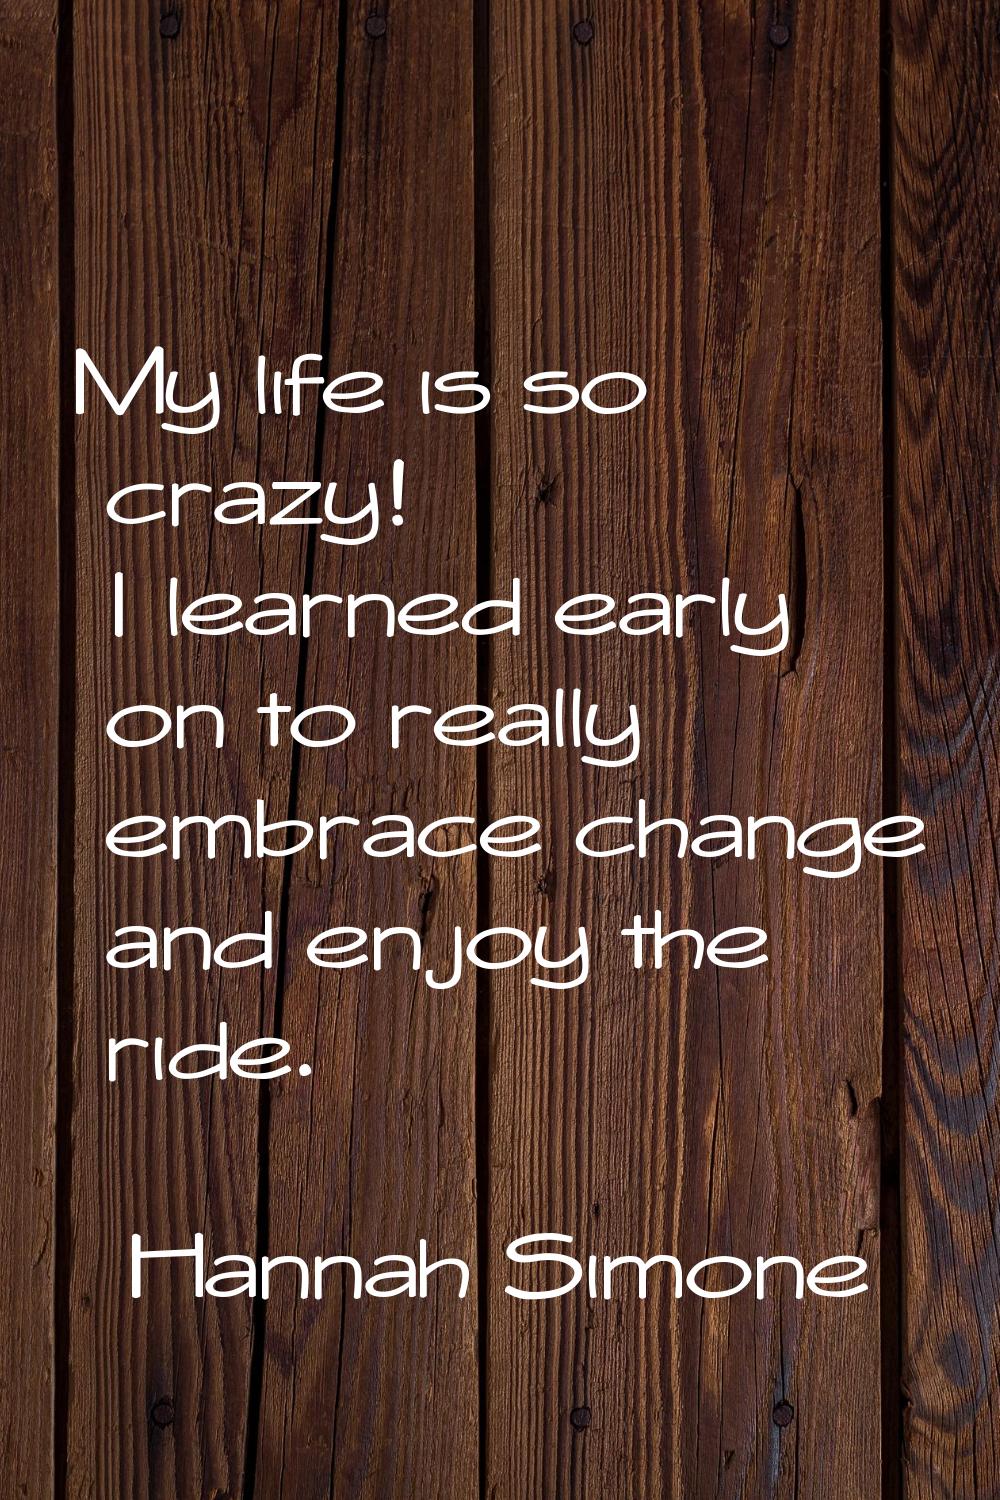 My life is so crazy! I learned early on to really embrace change and enjoy the ride.